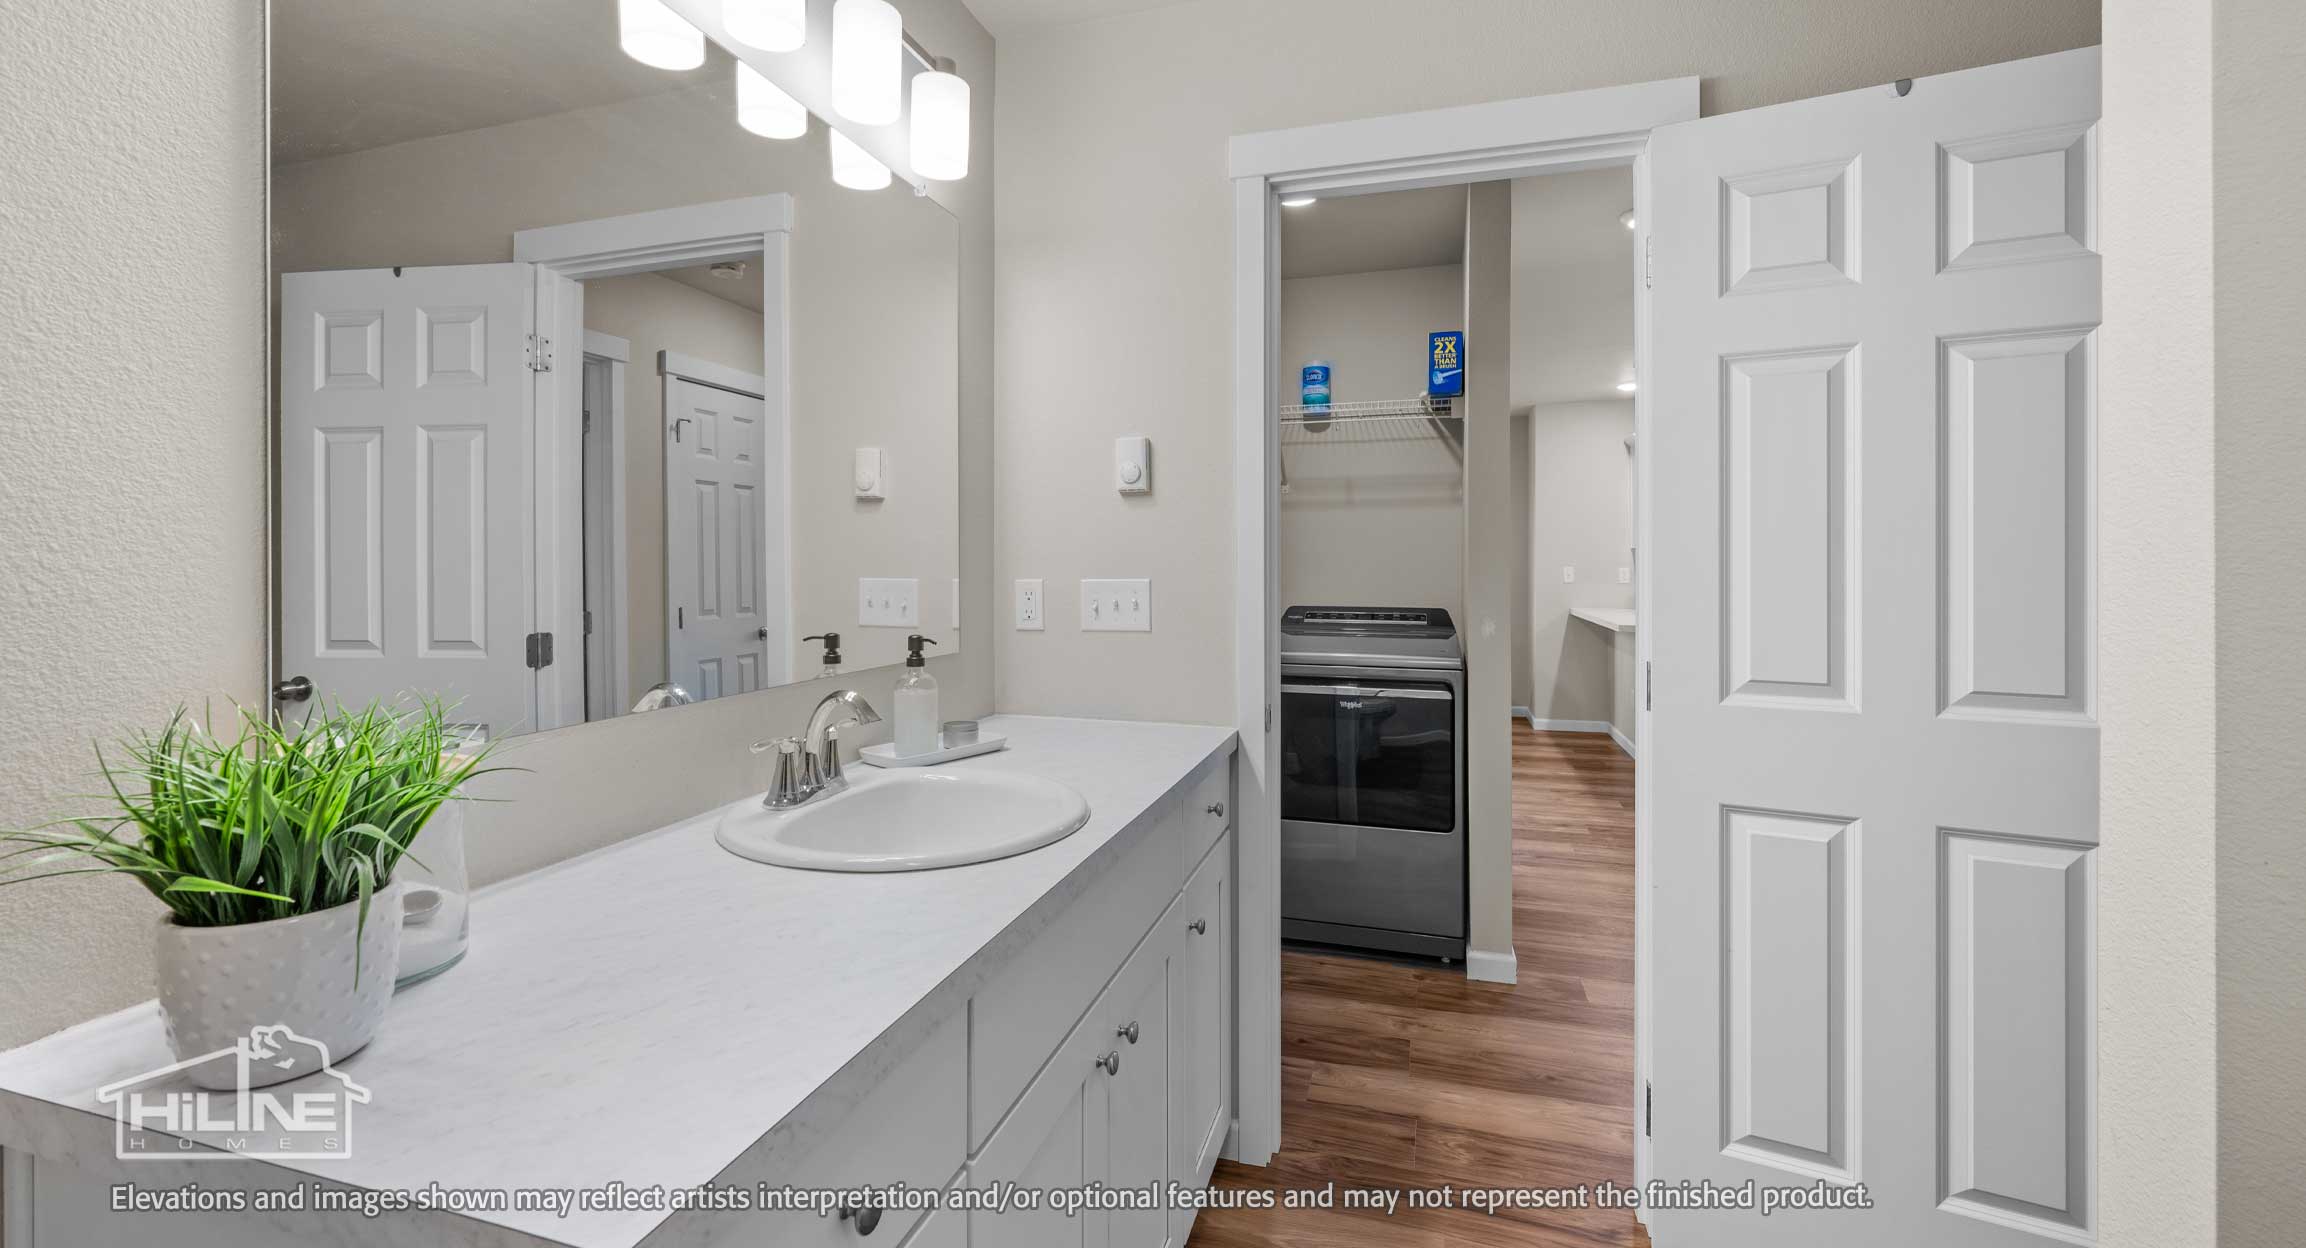 Image of HiLine Homes Plan 936 Bathroom to Laundry Room.